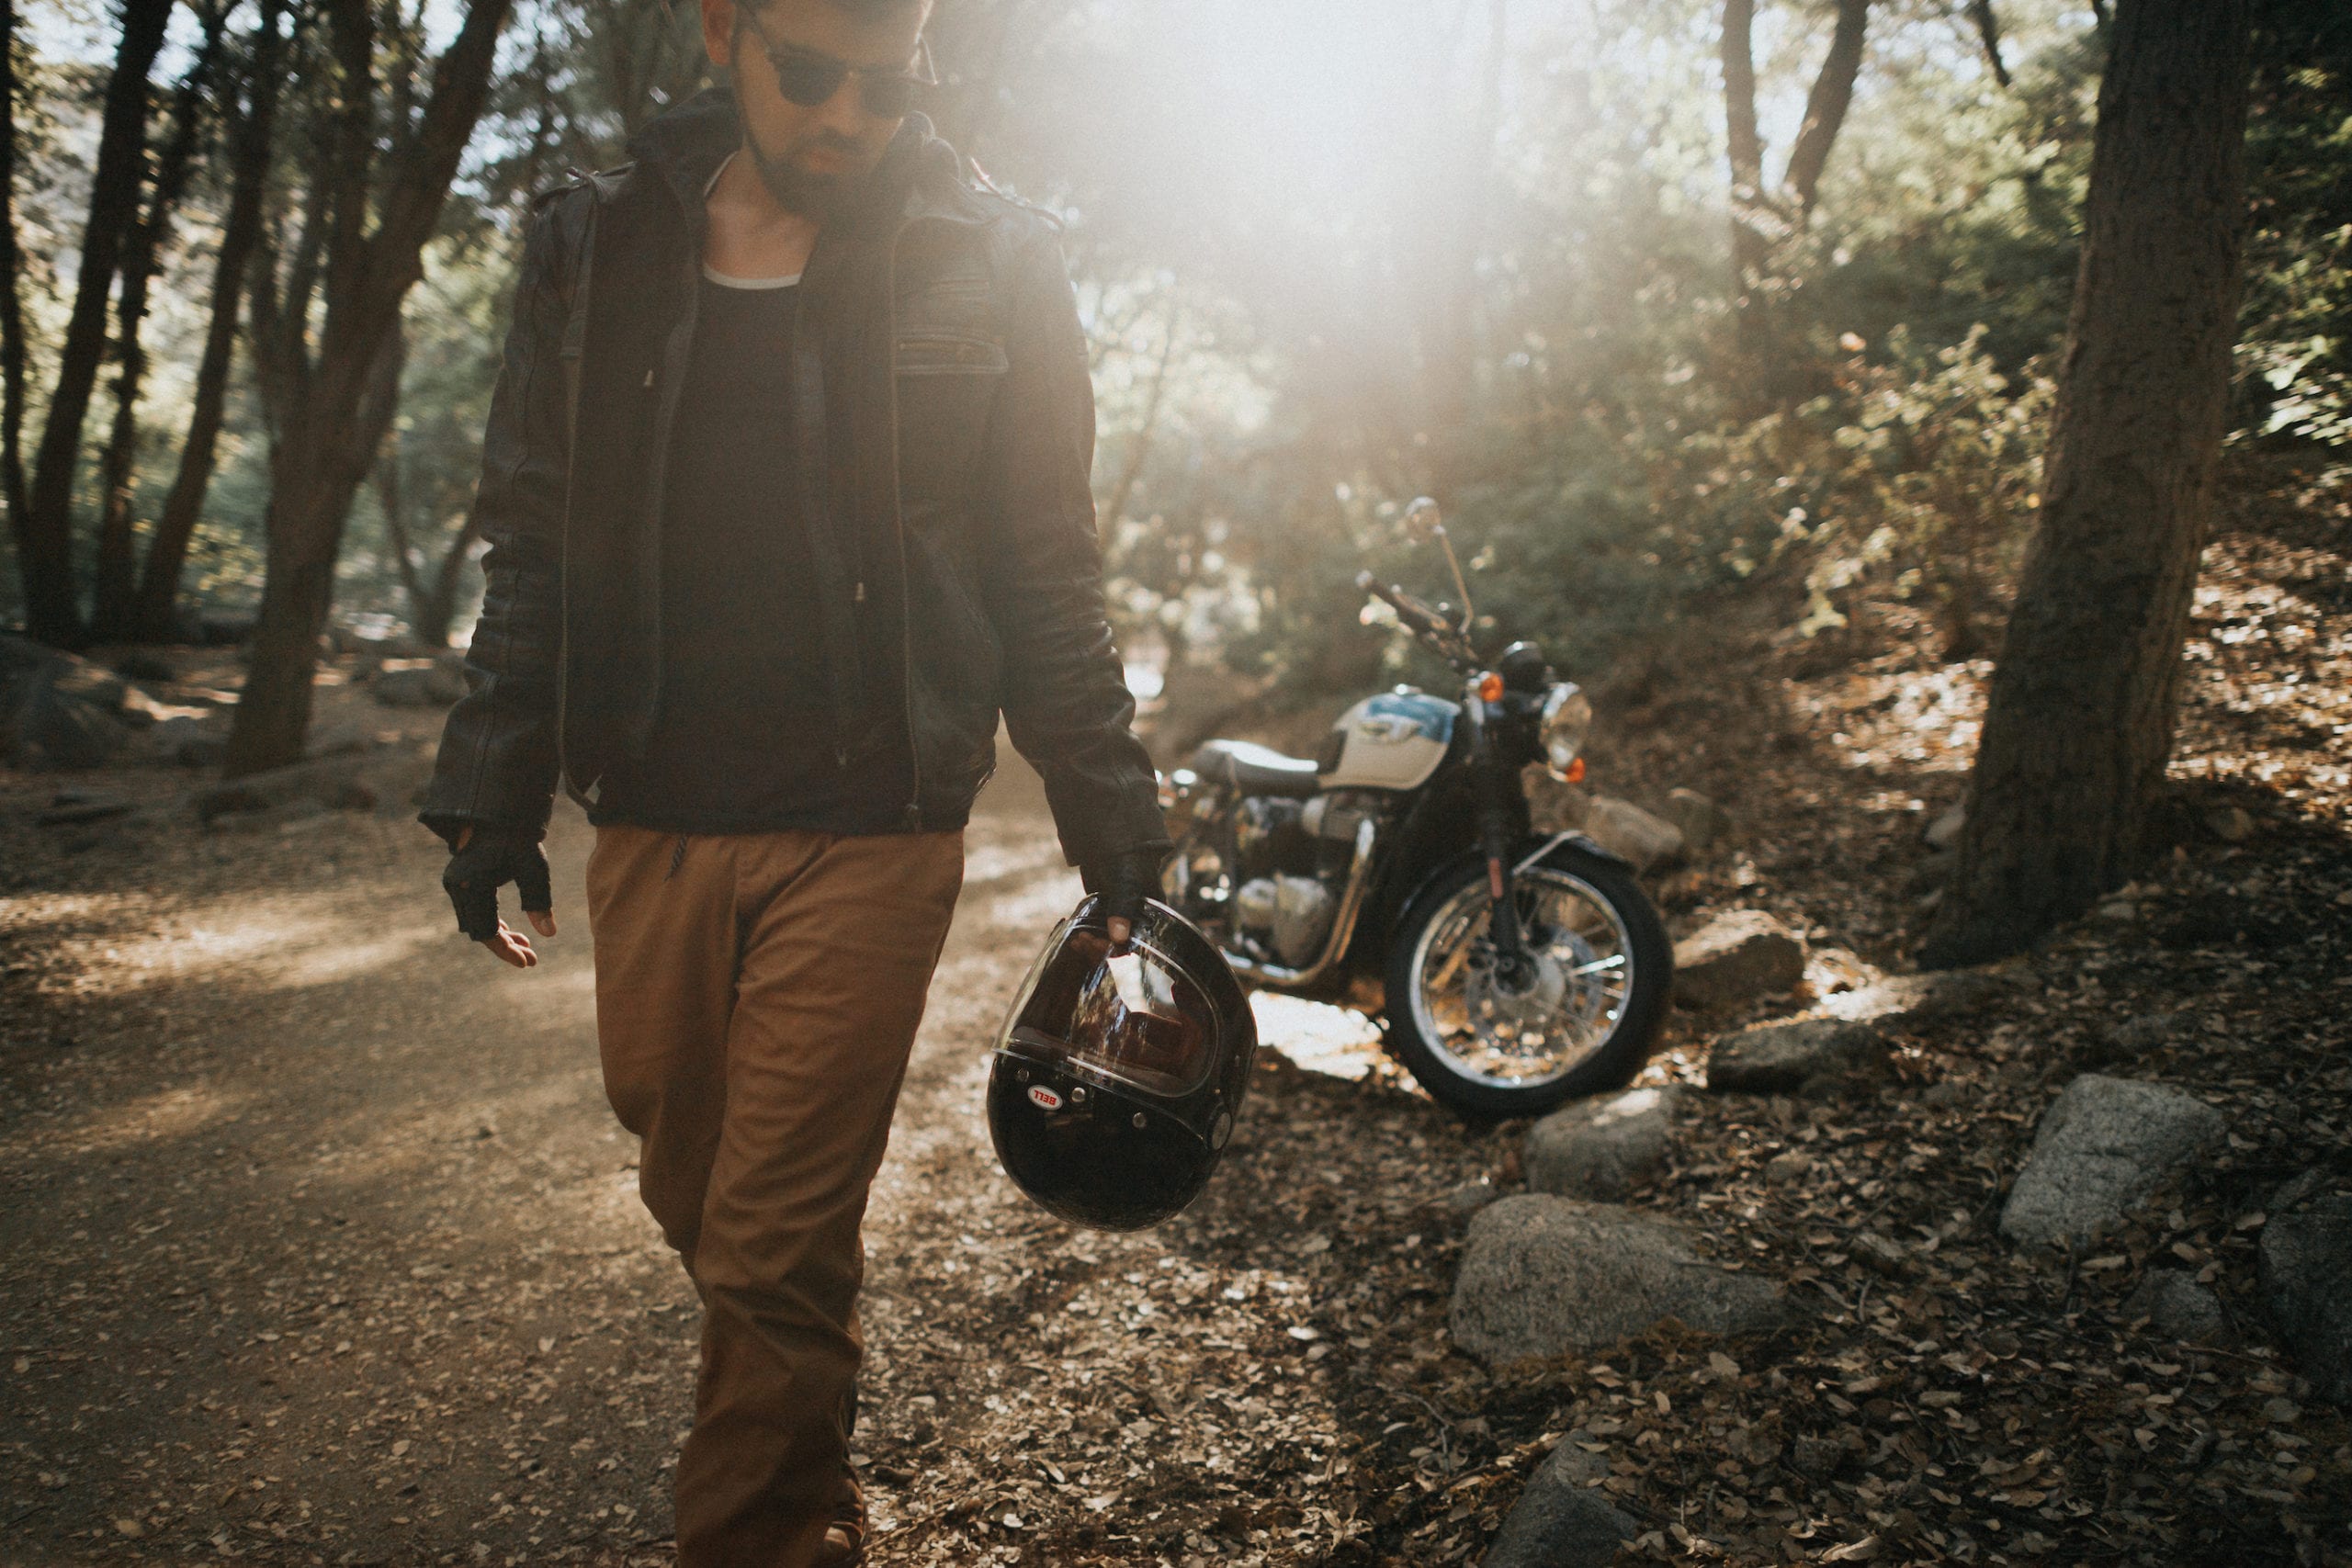 IU CI Studios Portfolio Triumph Motorcycles Euro Bike Photography Motorcycle rider wearing shades and leather gear poses for the camera in the middle of the forest holding his Bell helmet